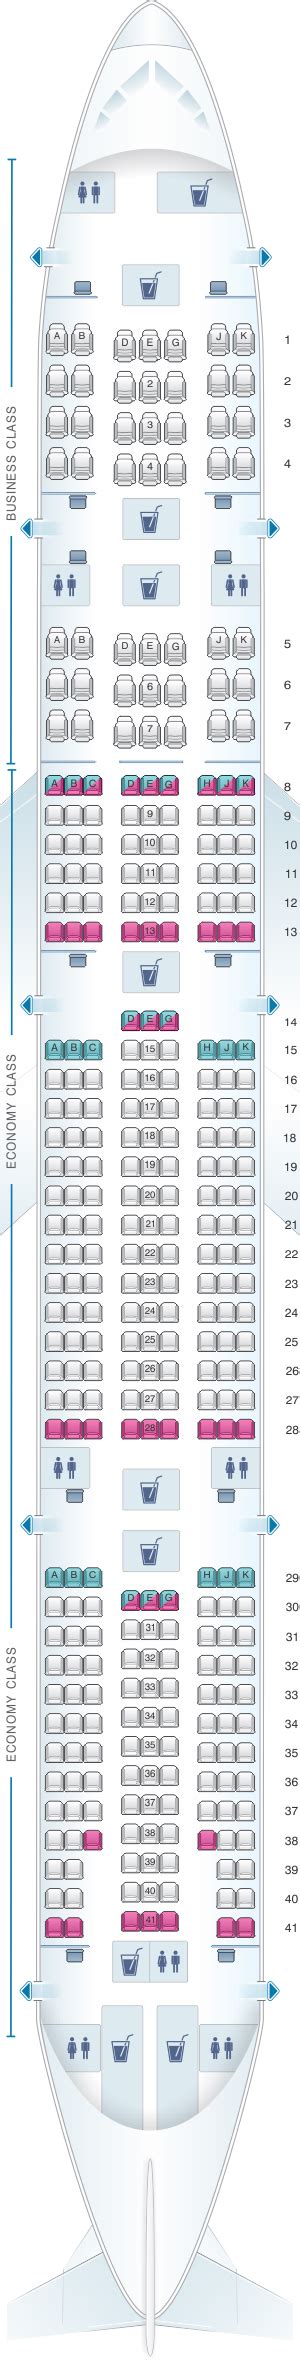 turkish airlines boeing 777-300er seat map